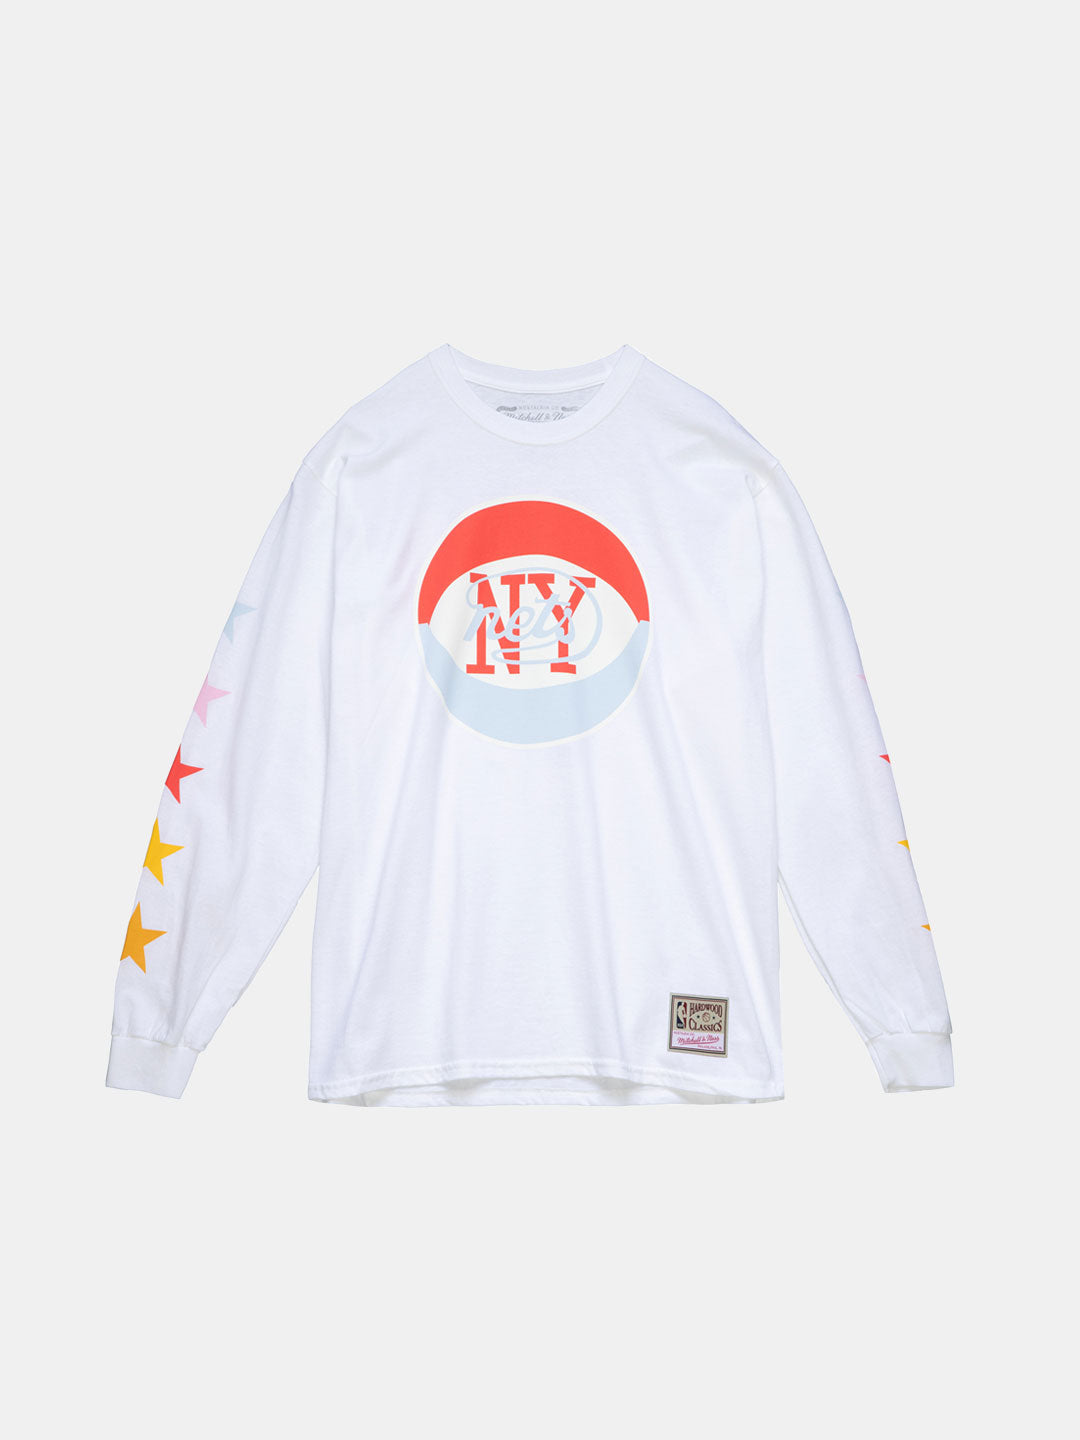 UNINTERRUPTED X Mitchell & Ness Legends Long-Sleeve Tee Nets - front view of white long sleeve with graphic